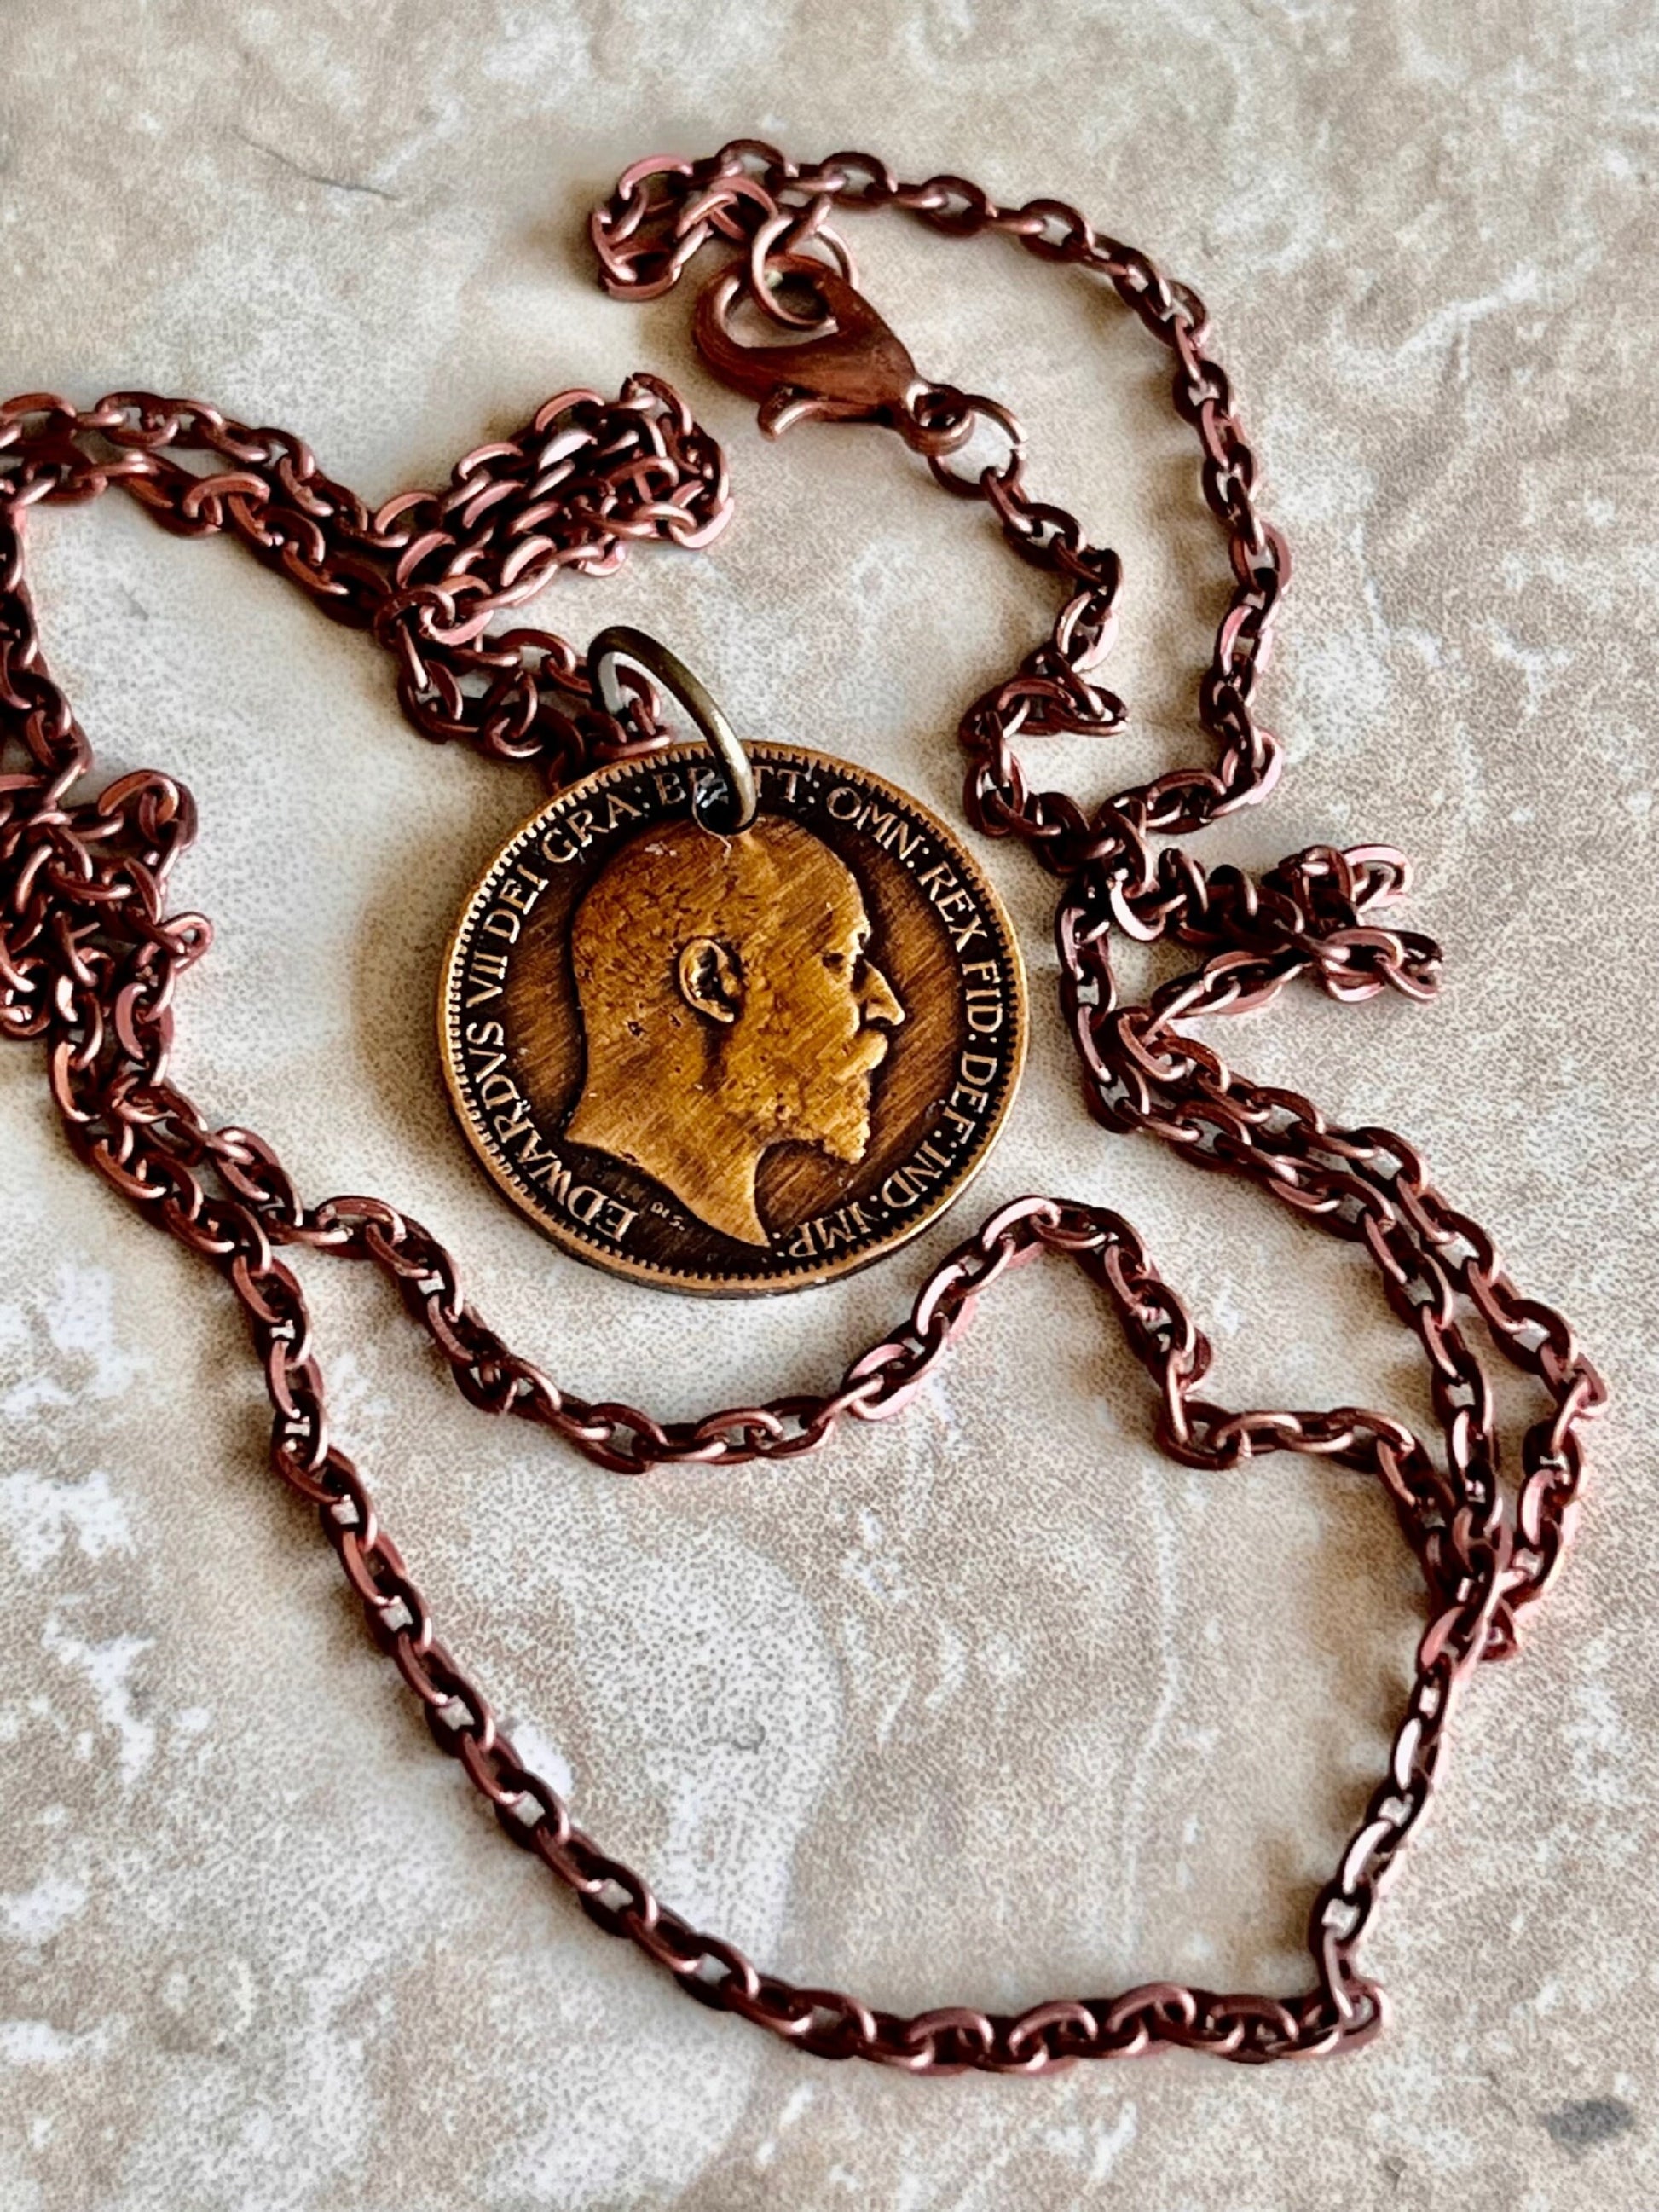 British Farthing Coin Pendant UK United Kingdom Personal Necklace Handmade Jewelry Gift Friend Charm For Him Her World Coin Collector